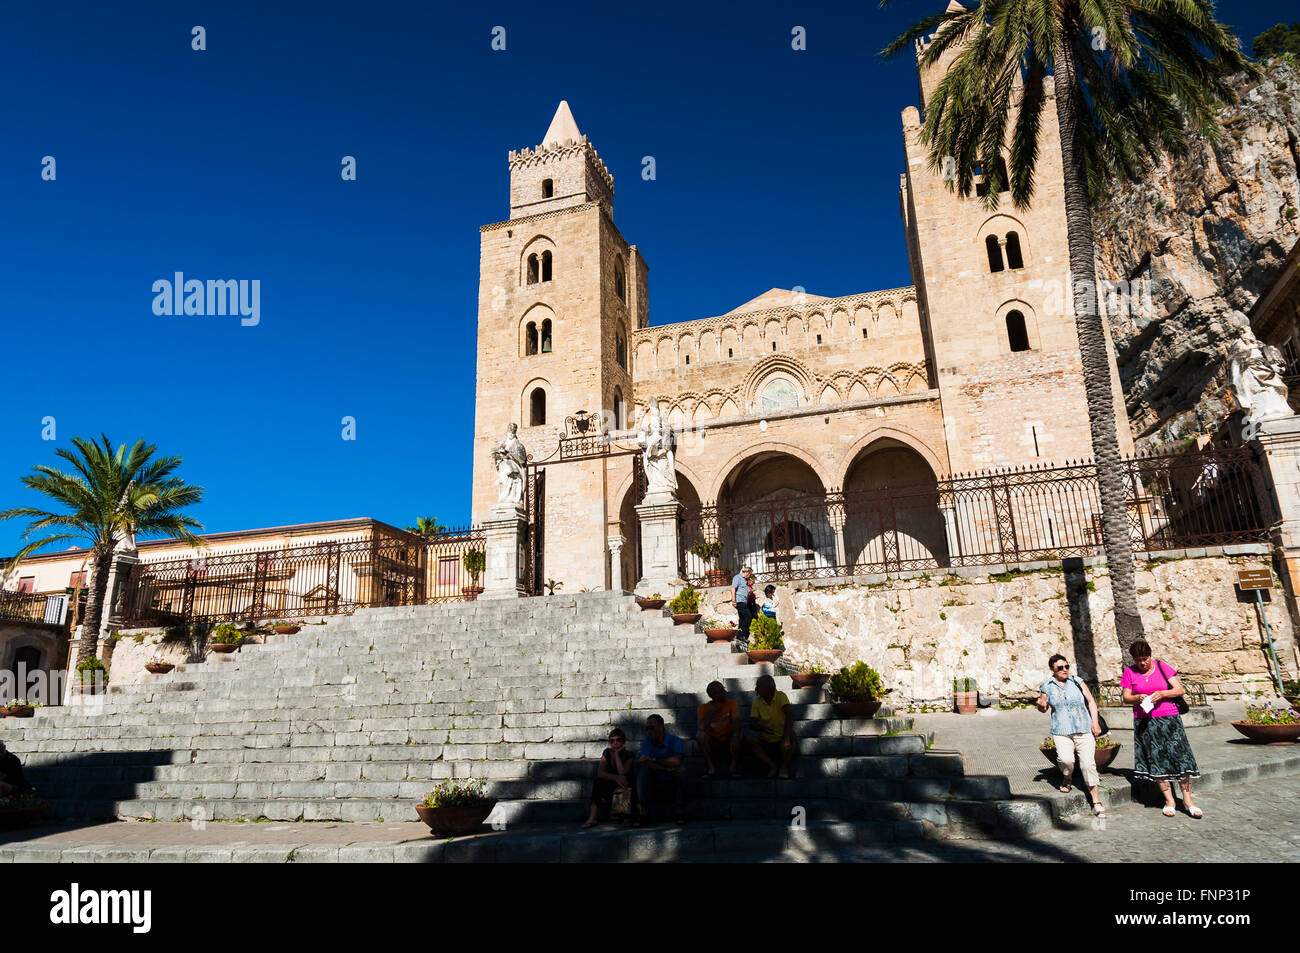 Cathedral-Basilica of Cefalù, is a Roman Catholic church in Cefalù, Sicily, Italy. Stock Photo